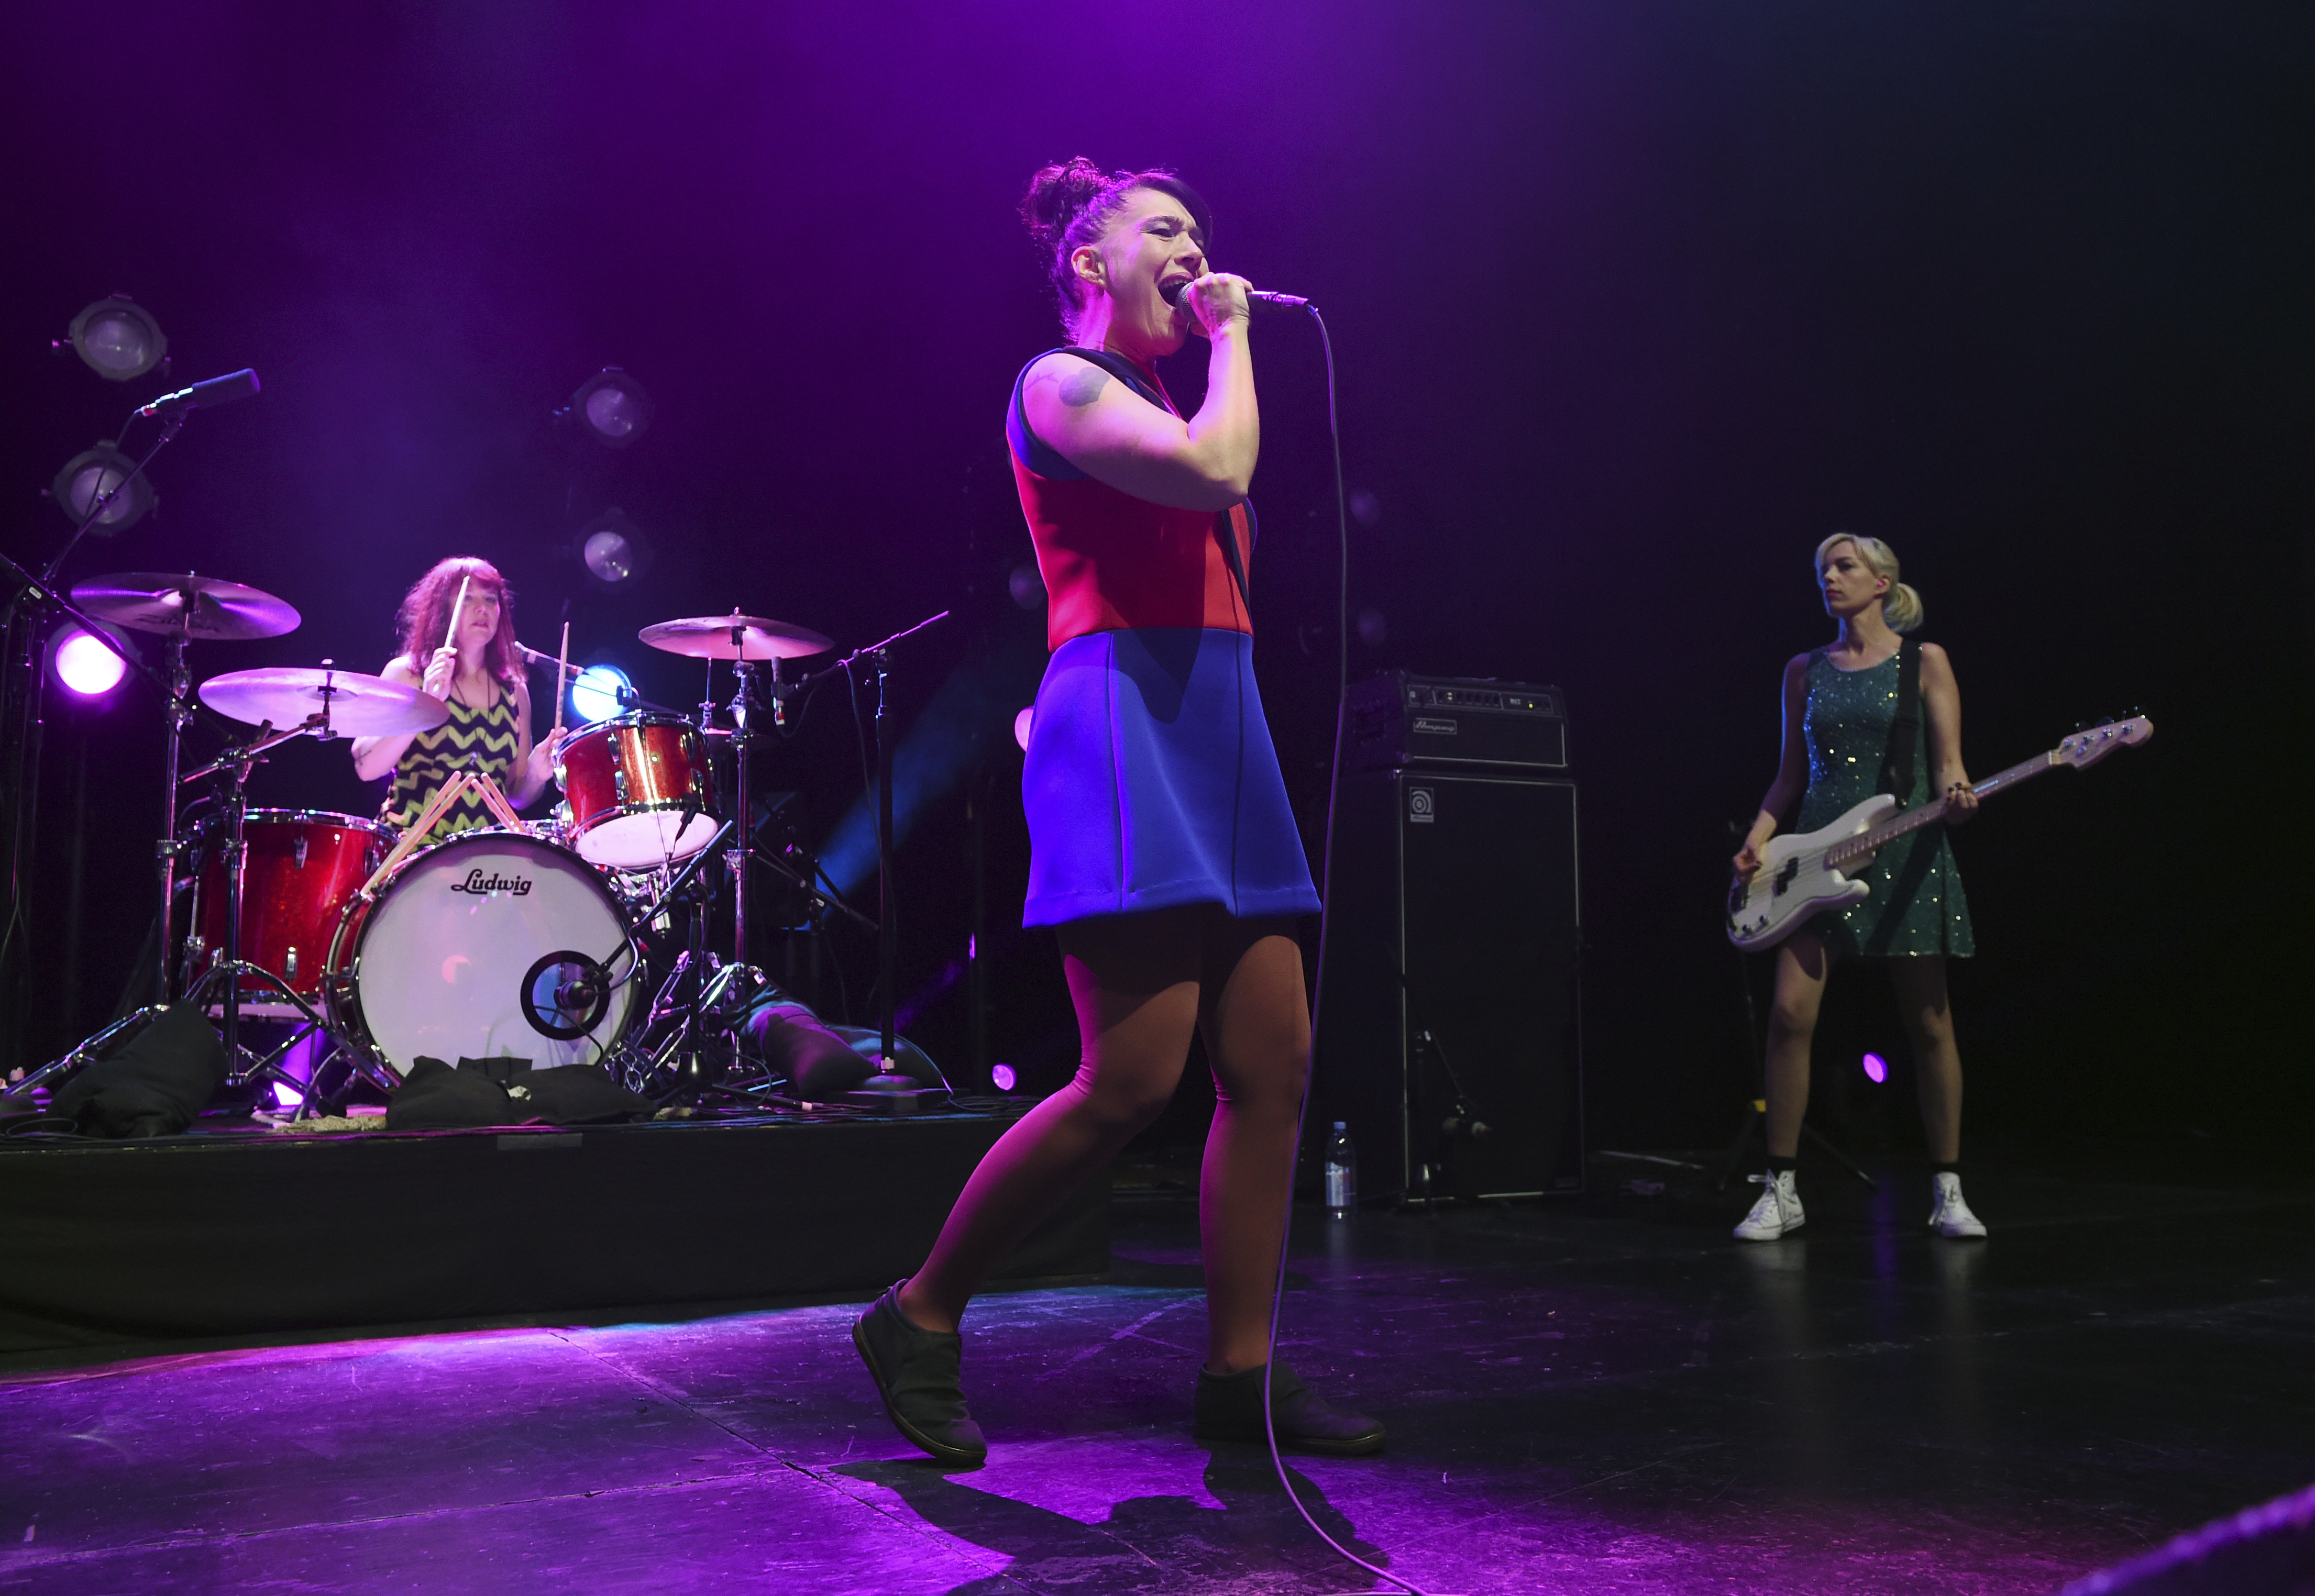 FILE - Kathleen Hanna, center, Tobi Vail, left, and Erica Dawn Lyle of the punk rock band Bikini Kill performs at the Hollywood Palladium in Los Angeles on May 2, 2019. Hanna released a memoir "Rebel Girl: My Life as a Feminist Punk." (Photo by Chris Pizzello/Invision/AP, File)